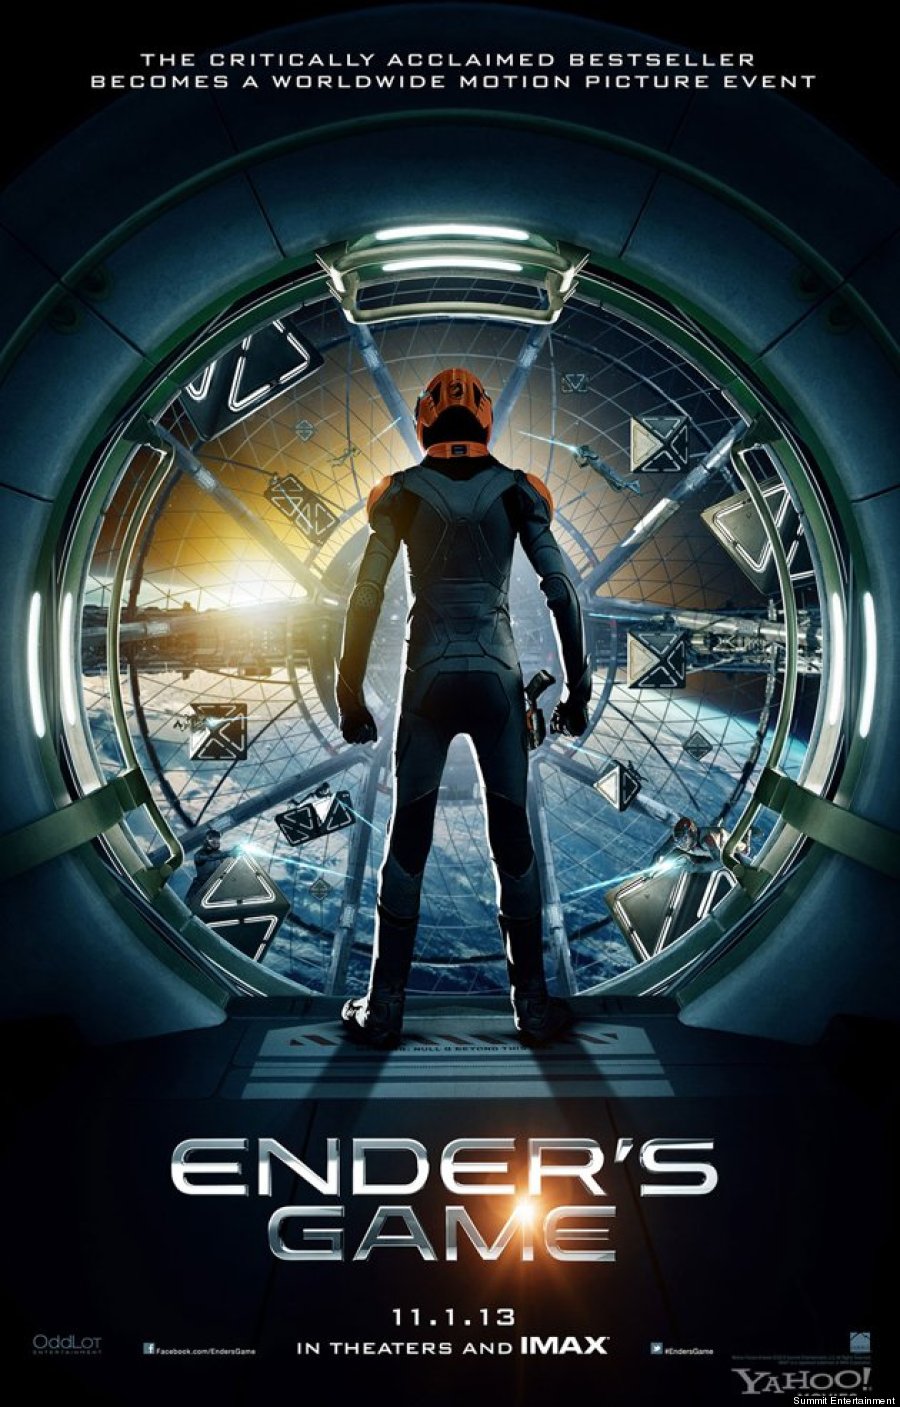 Ender's Game Movie Poster Featuring Harrison Ford and Abigail Breslin